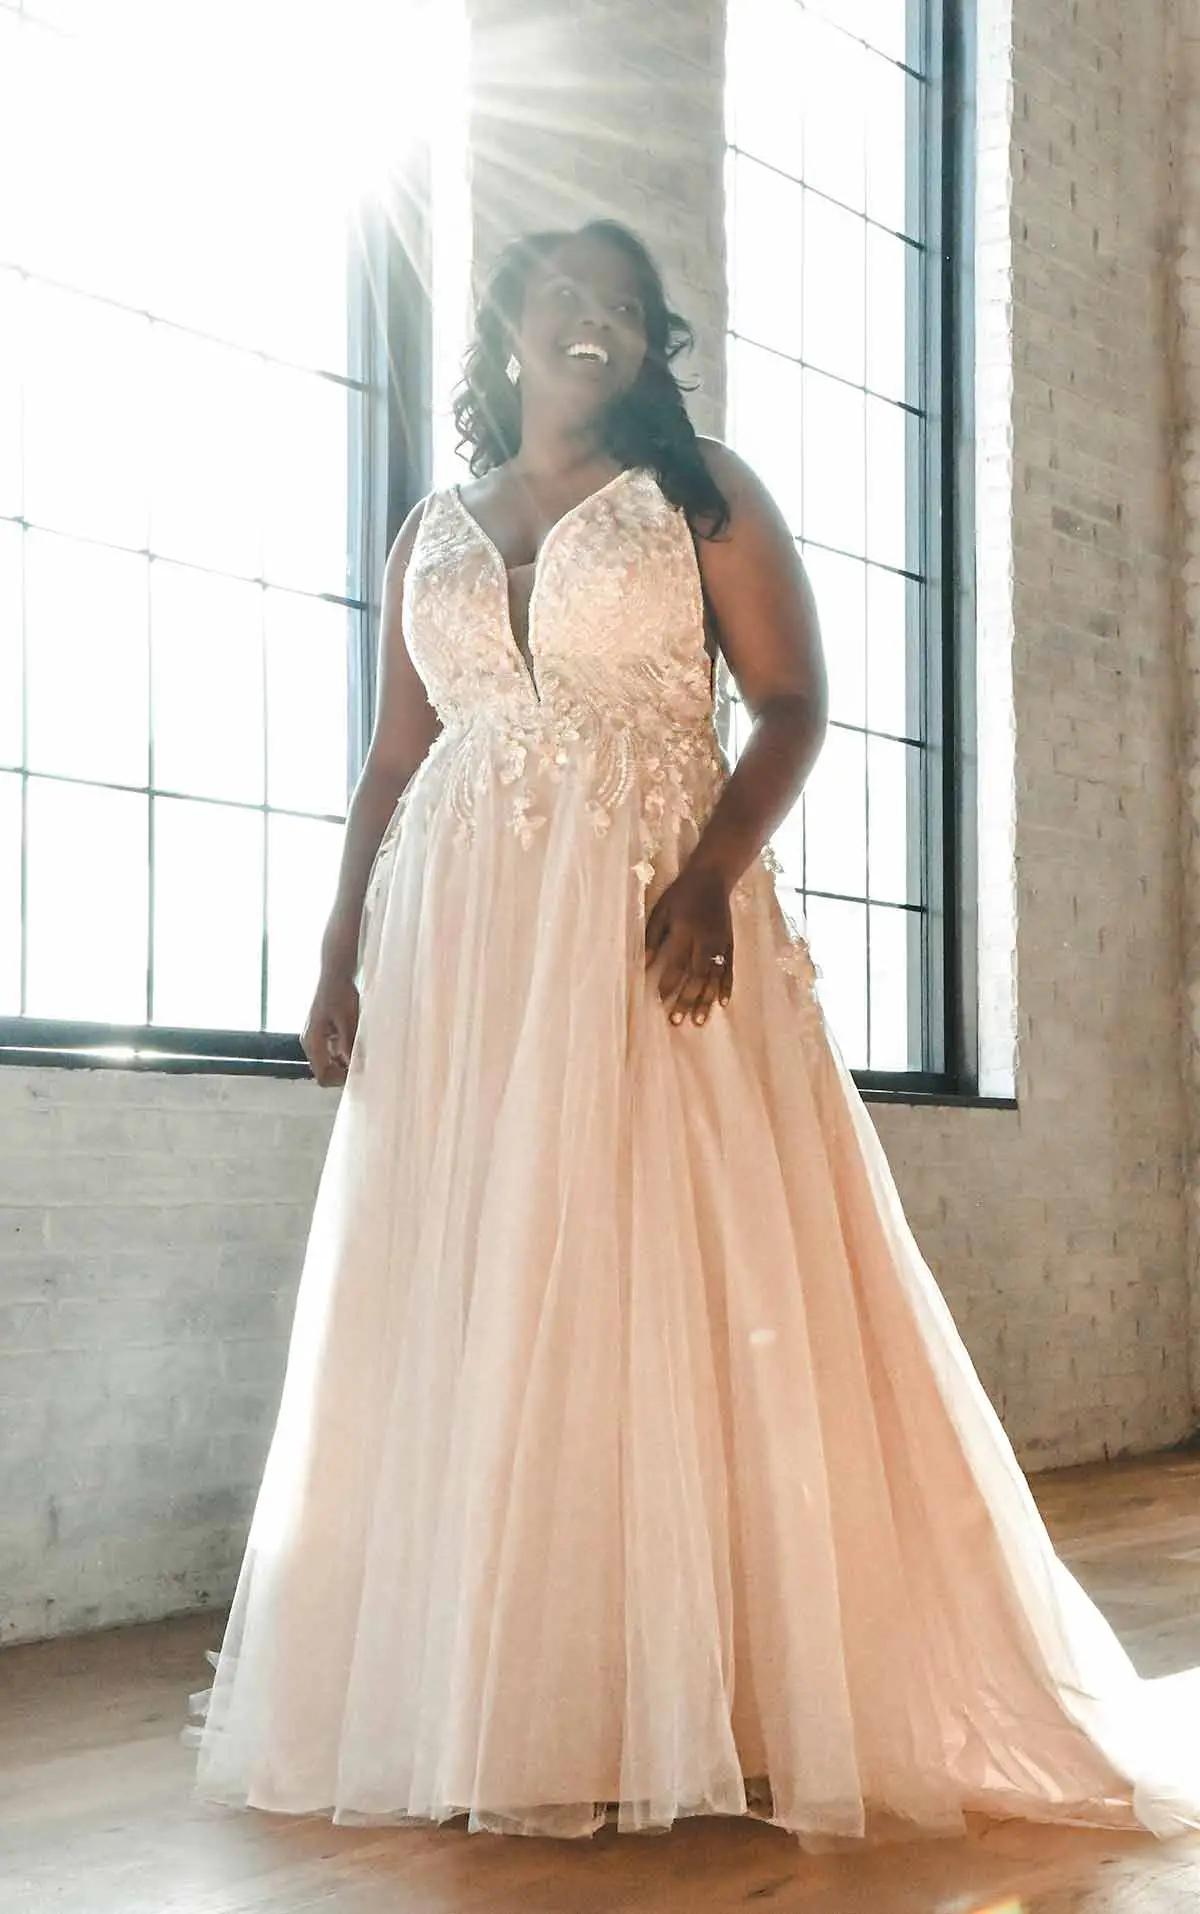 Showcasing the Beauty of Every Body in Bridal Gowns Image